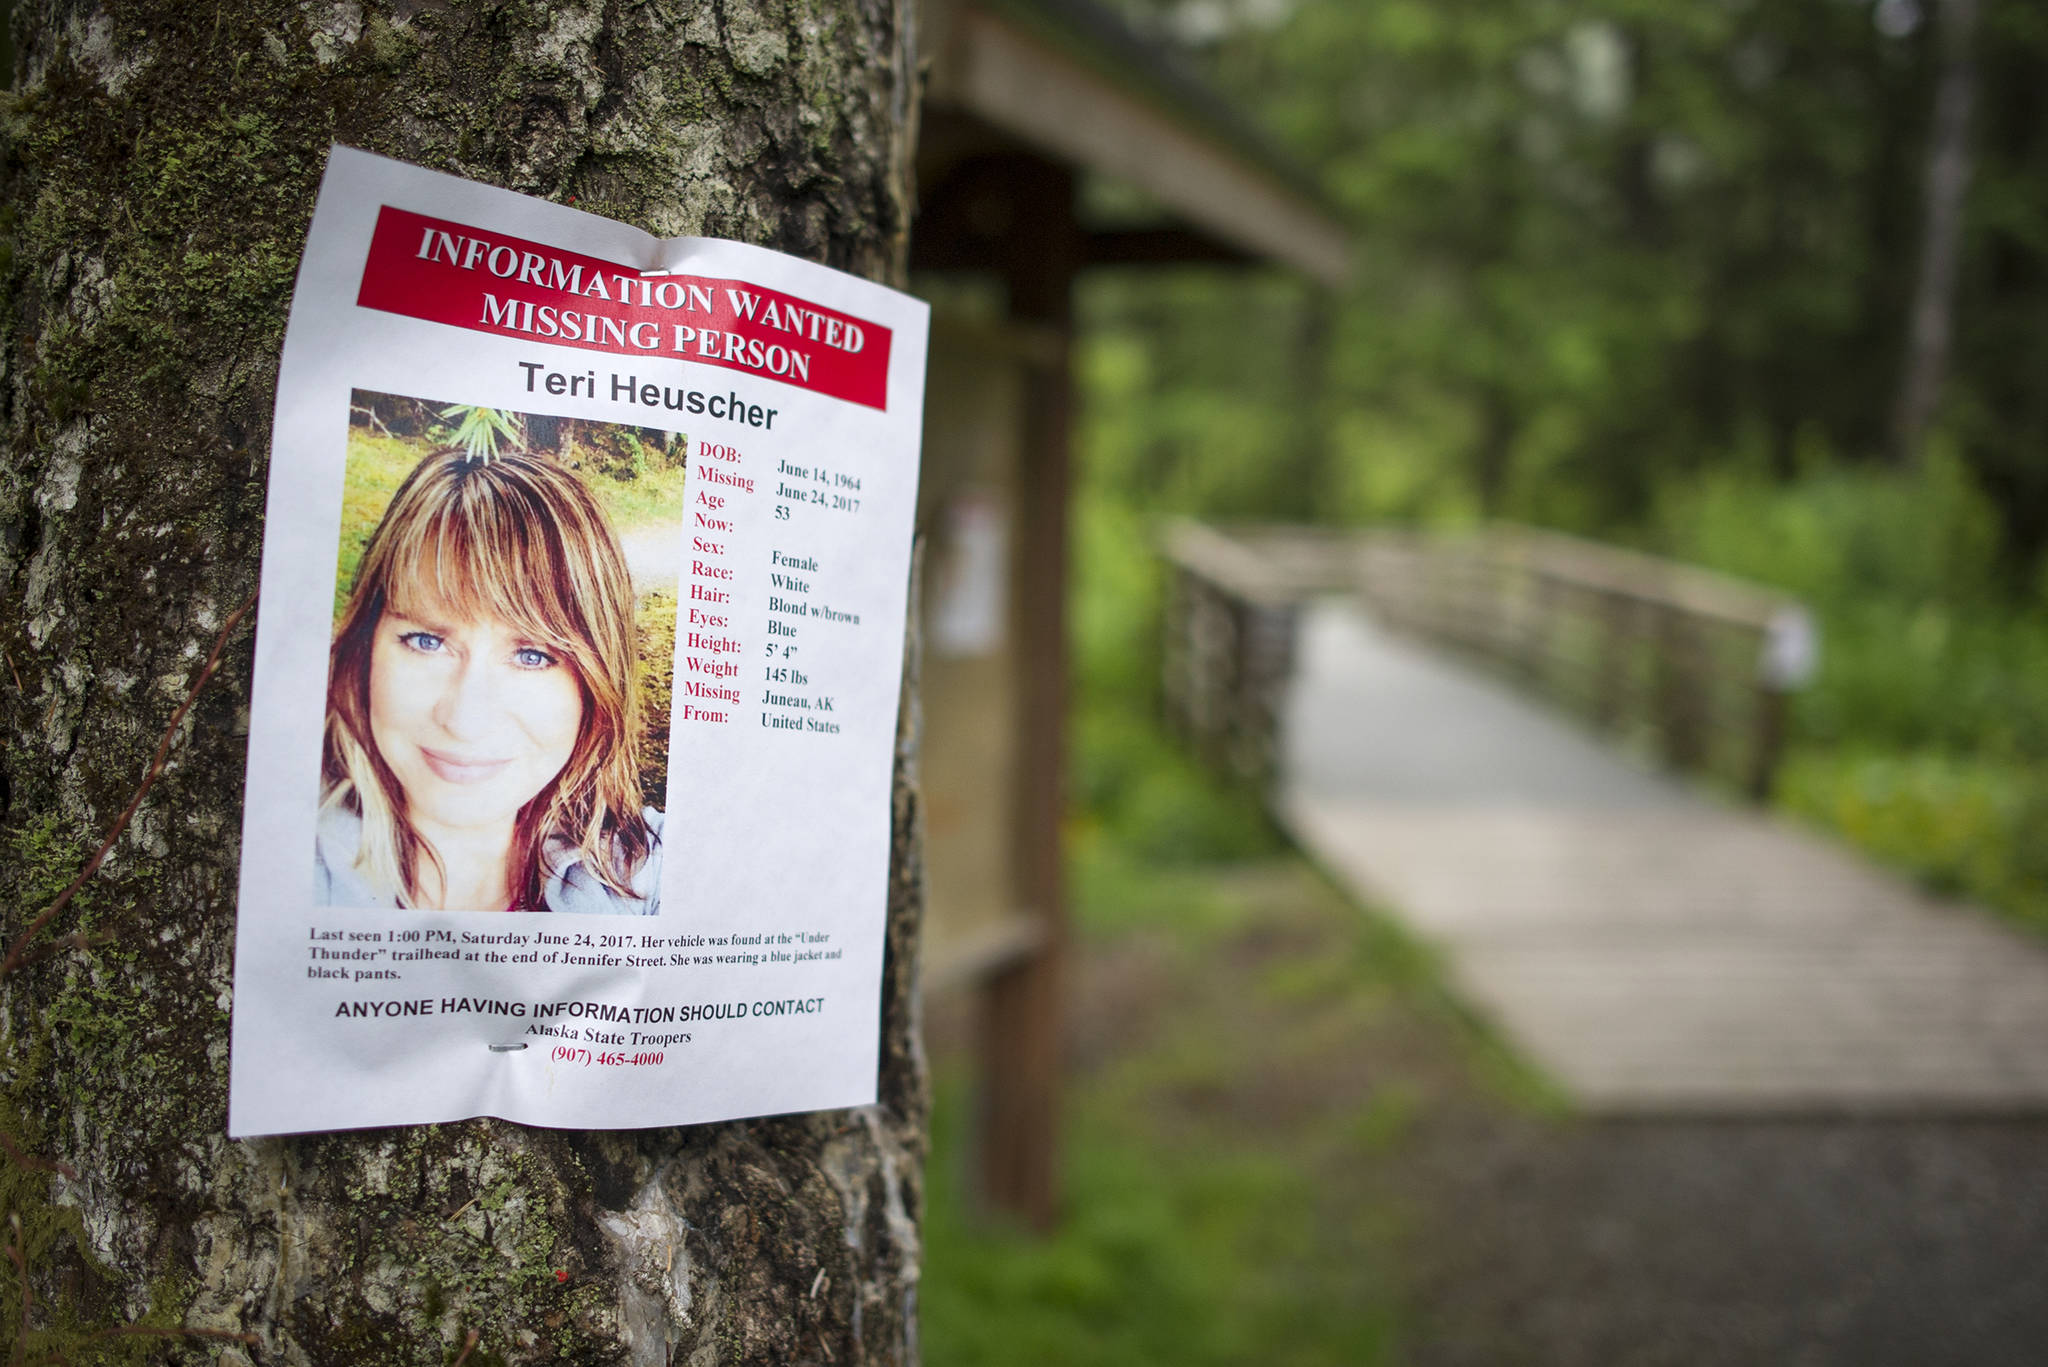 Human remains ID’d as missing hiker